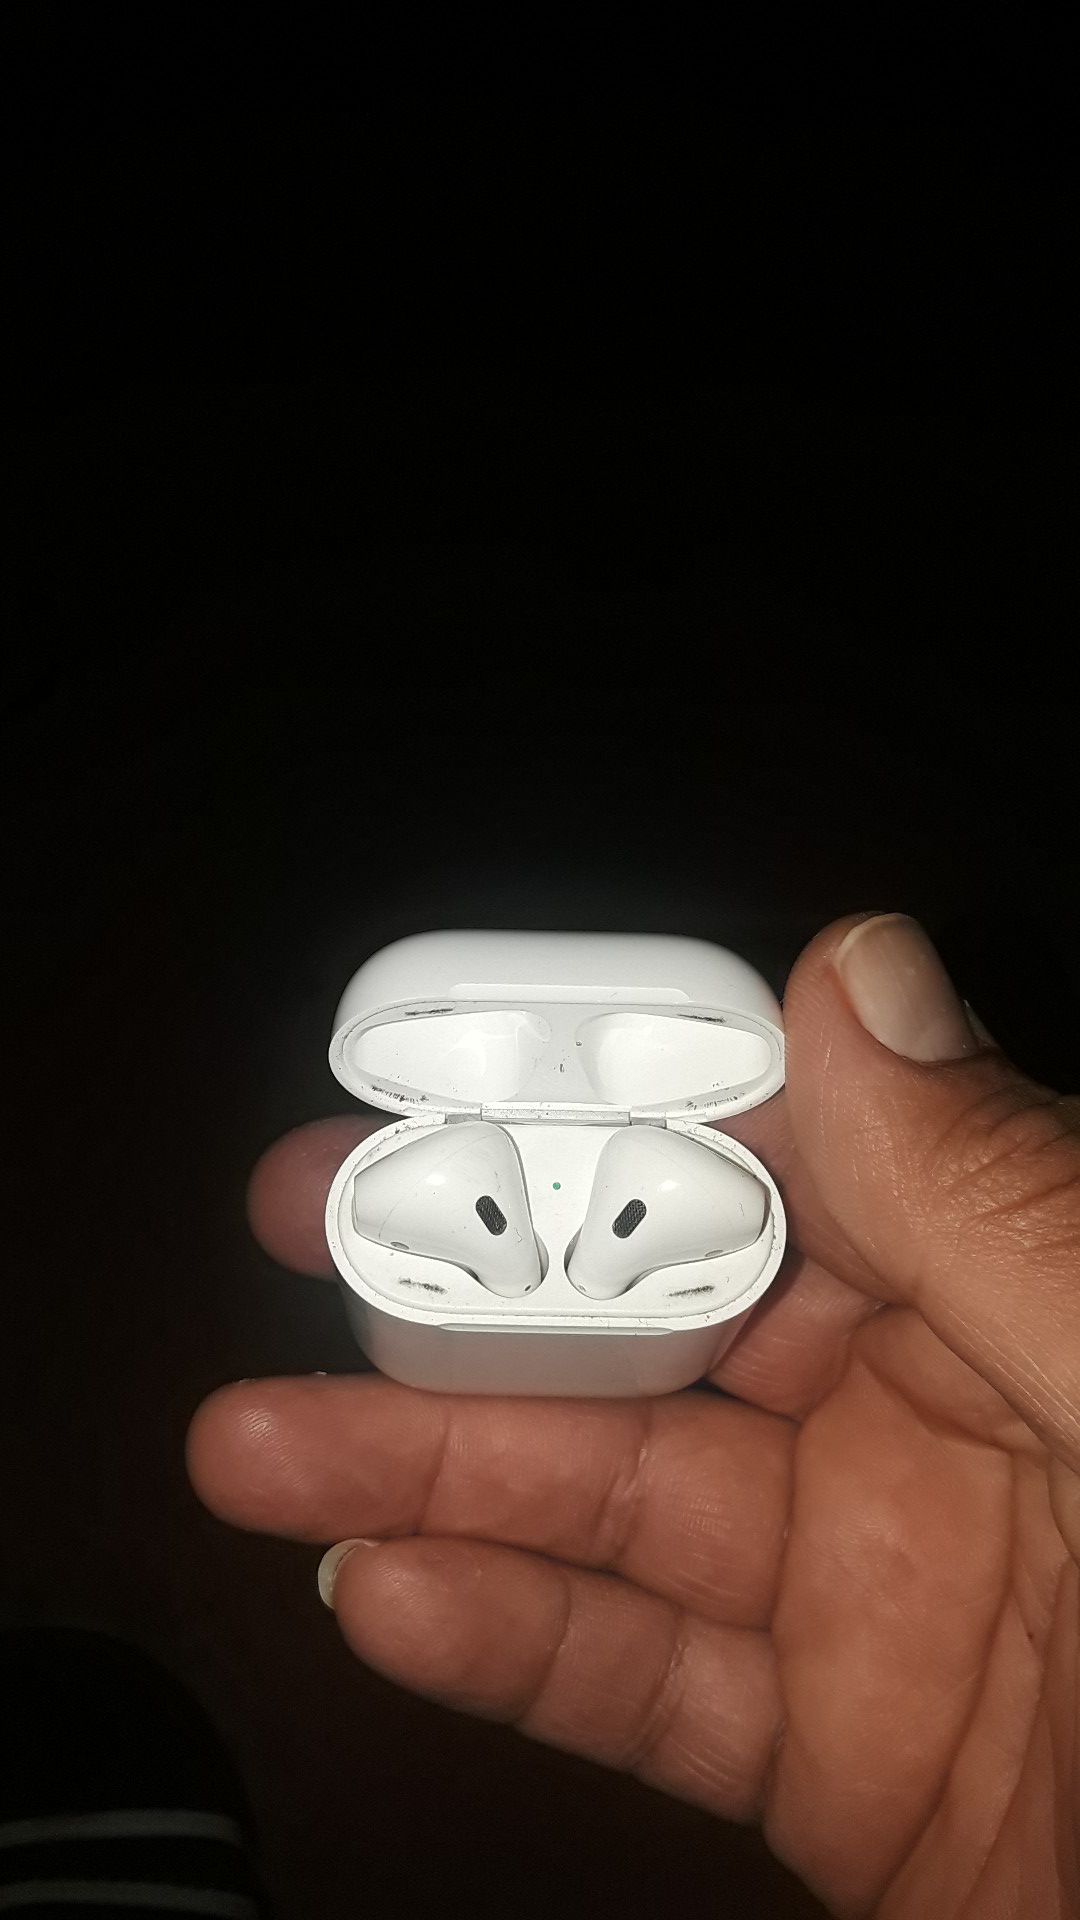 Nice apple airpods in good condition